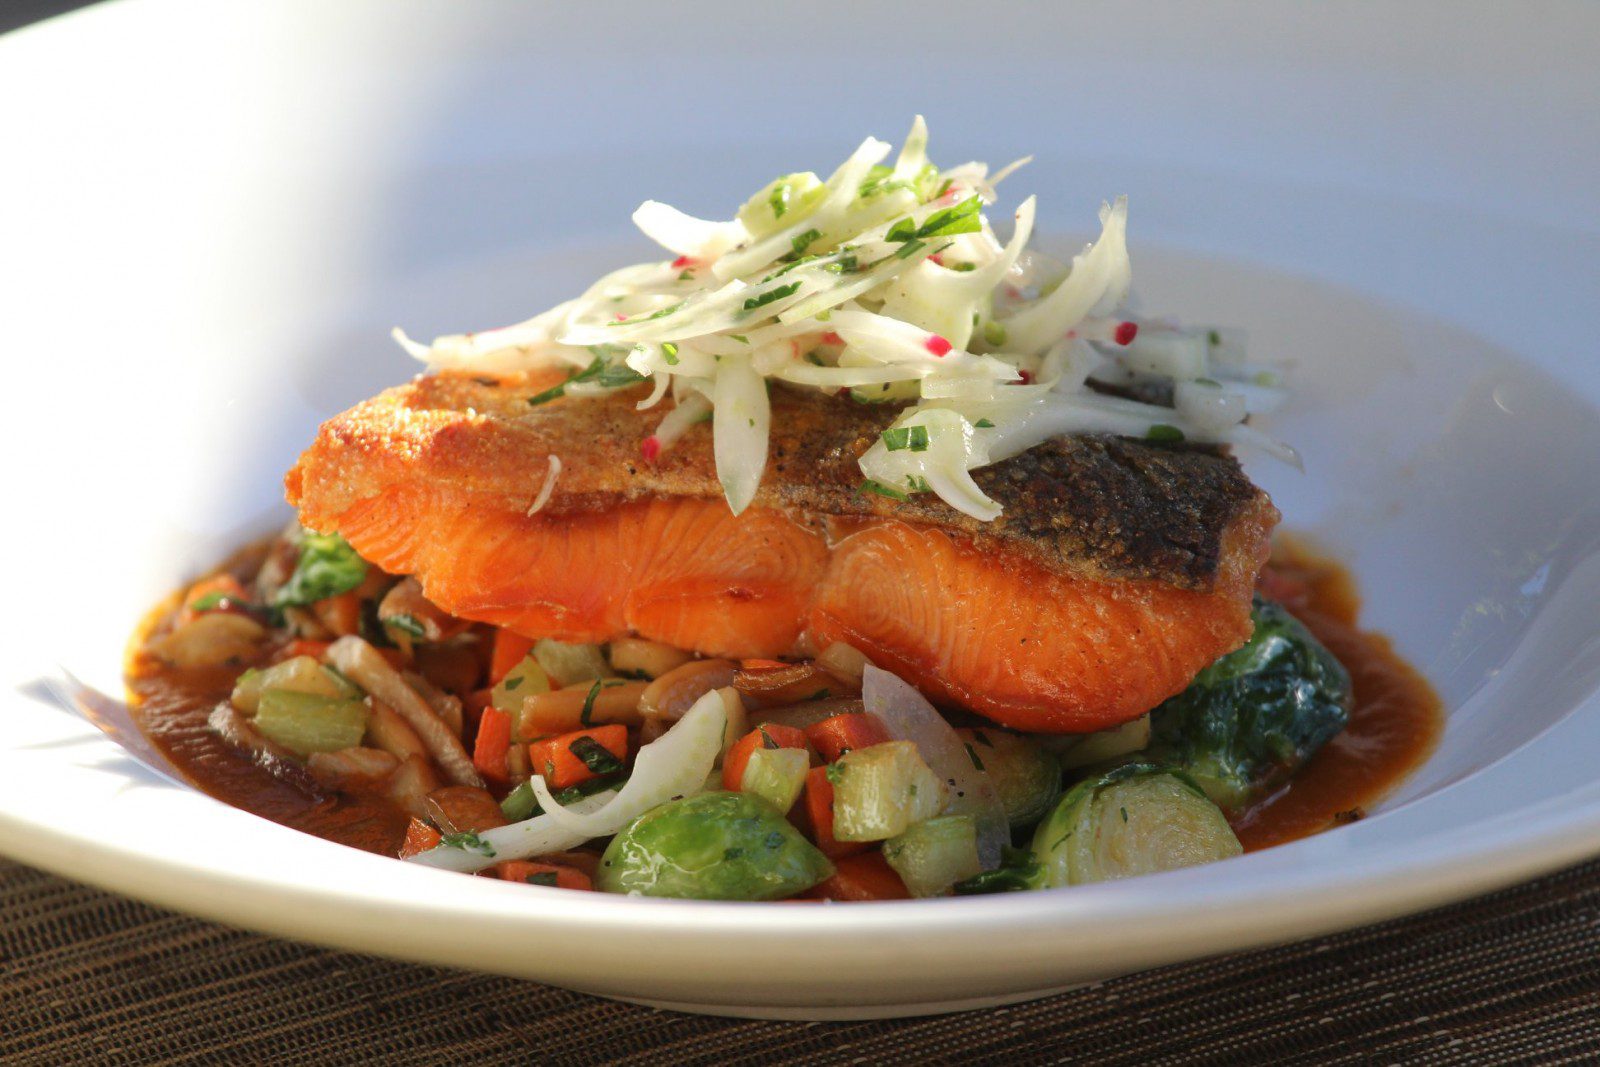 An image of a king salmon dish